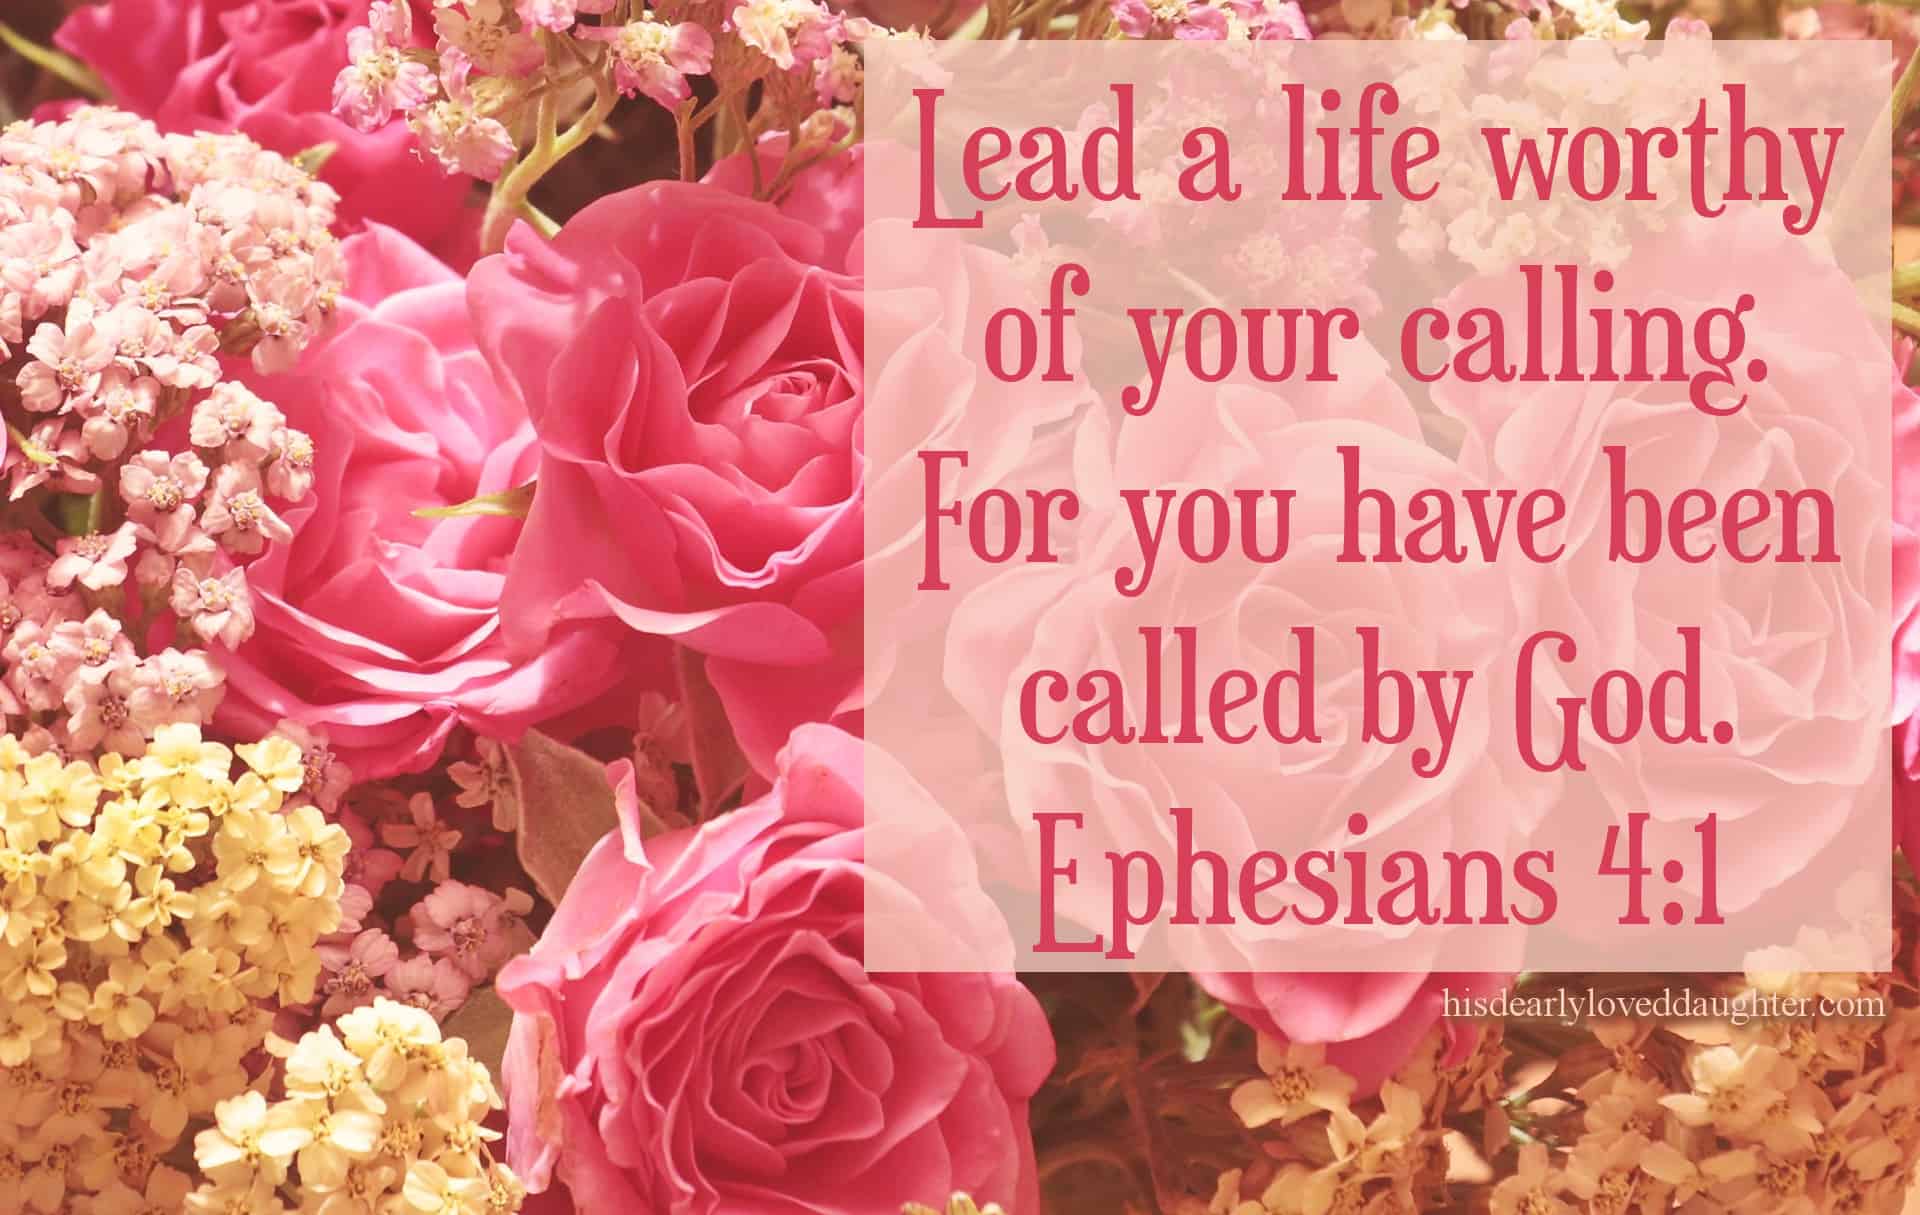 Lead a life worthy of your calling. For you have been called by God. Ephesians 4:1